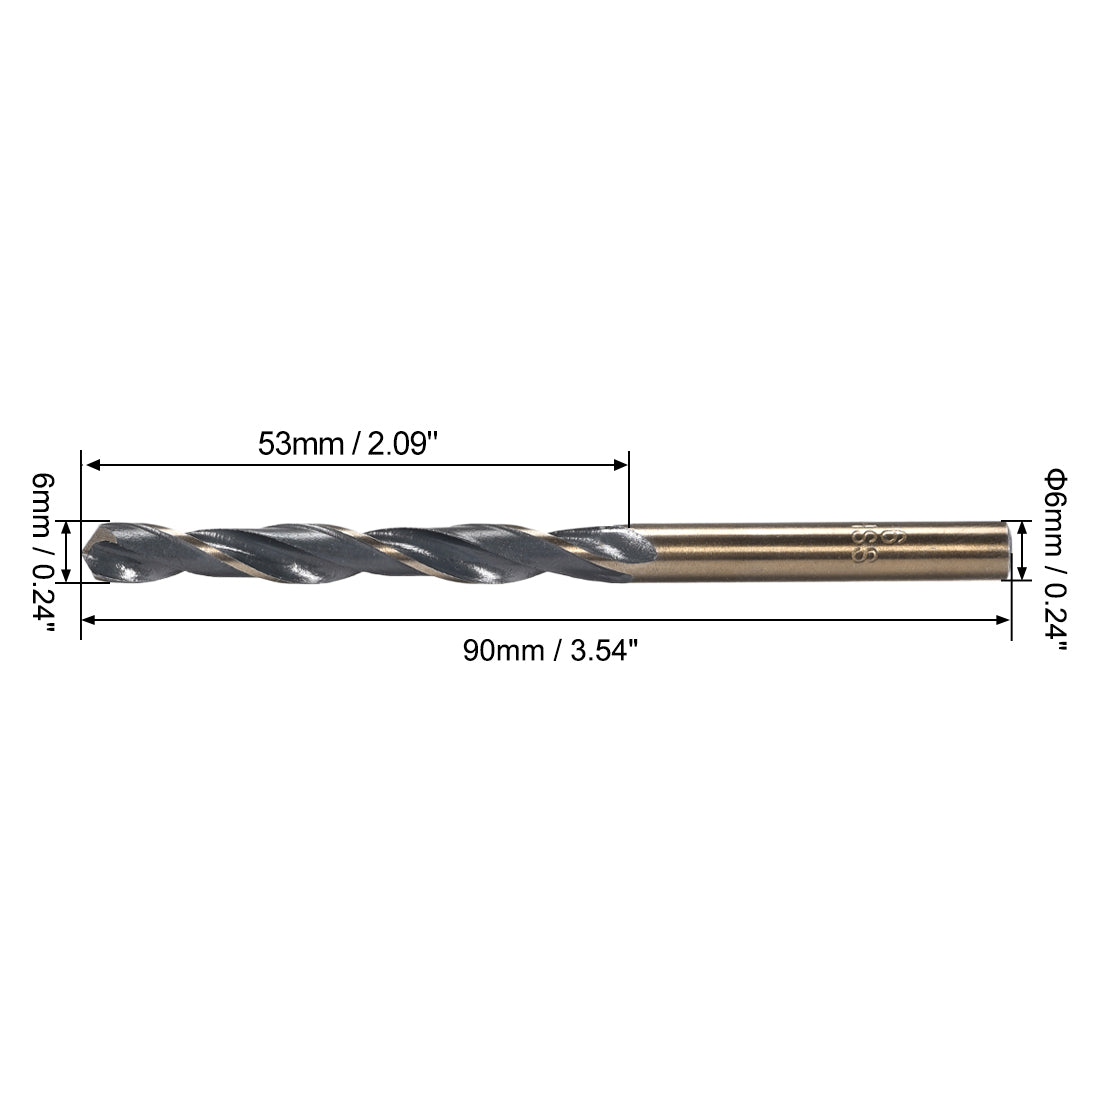 Uxcell Uxcell Straight Shank Twist Drill Bits 10mm HSS 4341 with 10mm Shank 2 Pcs